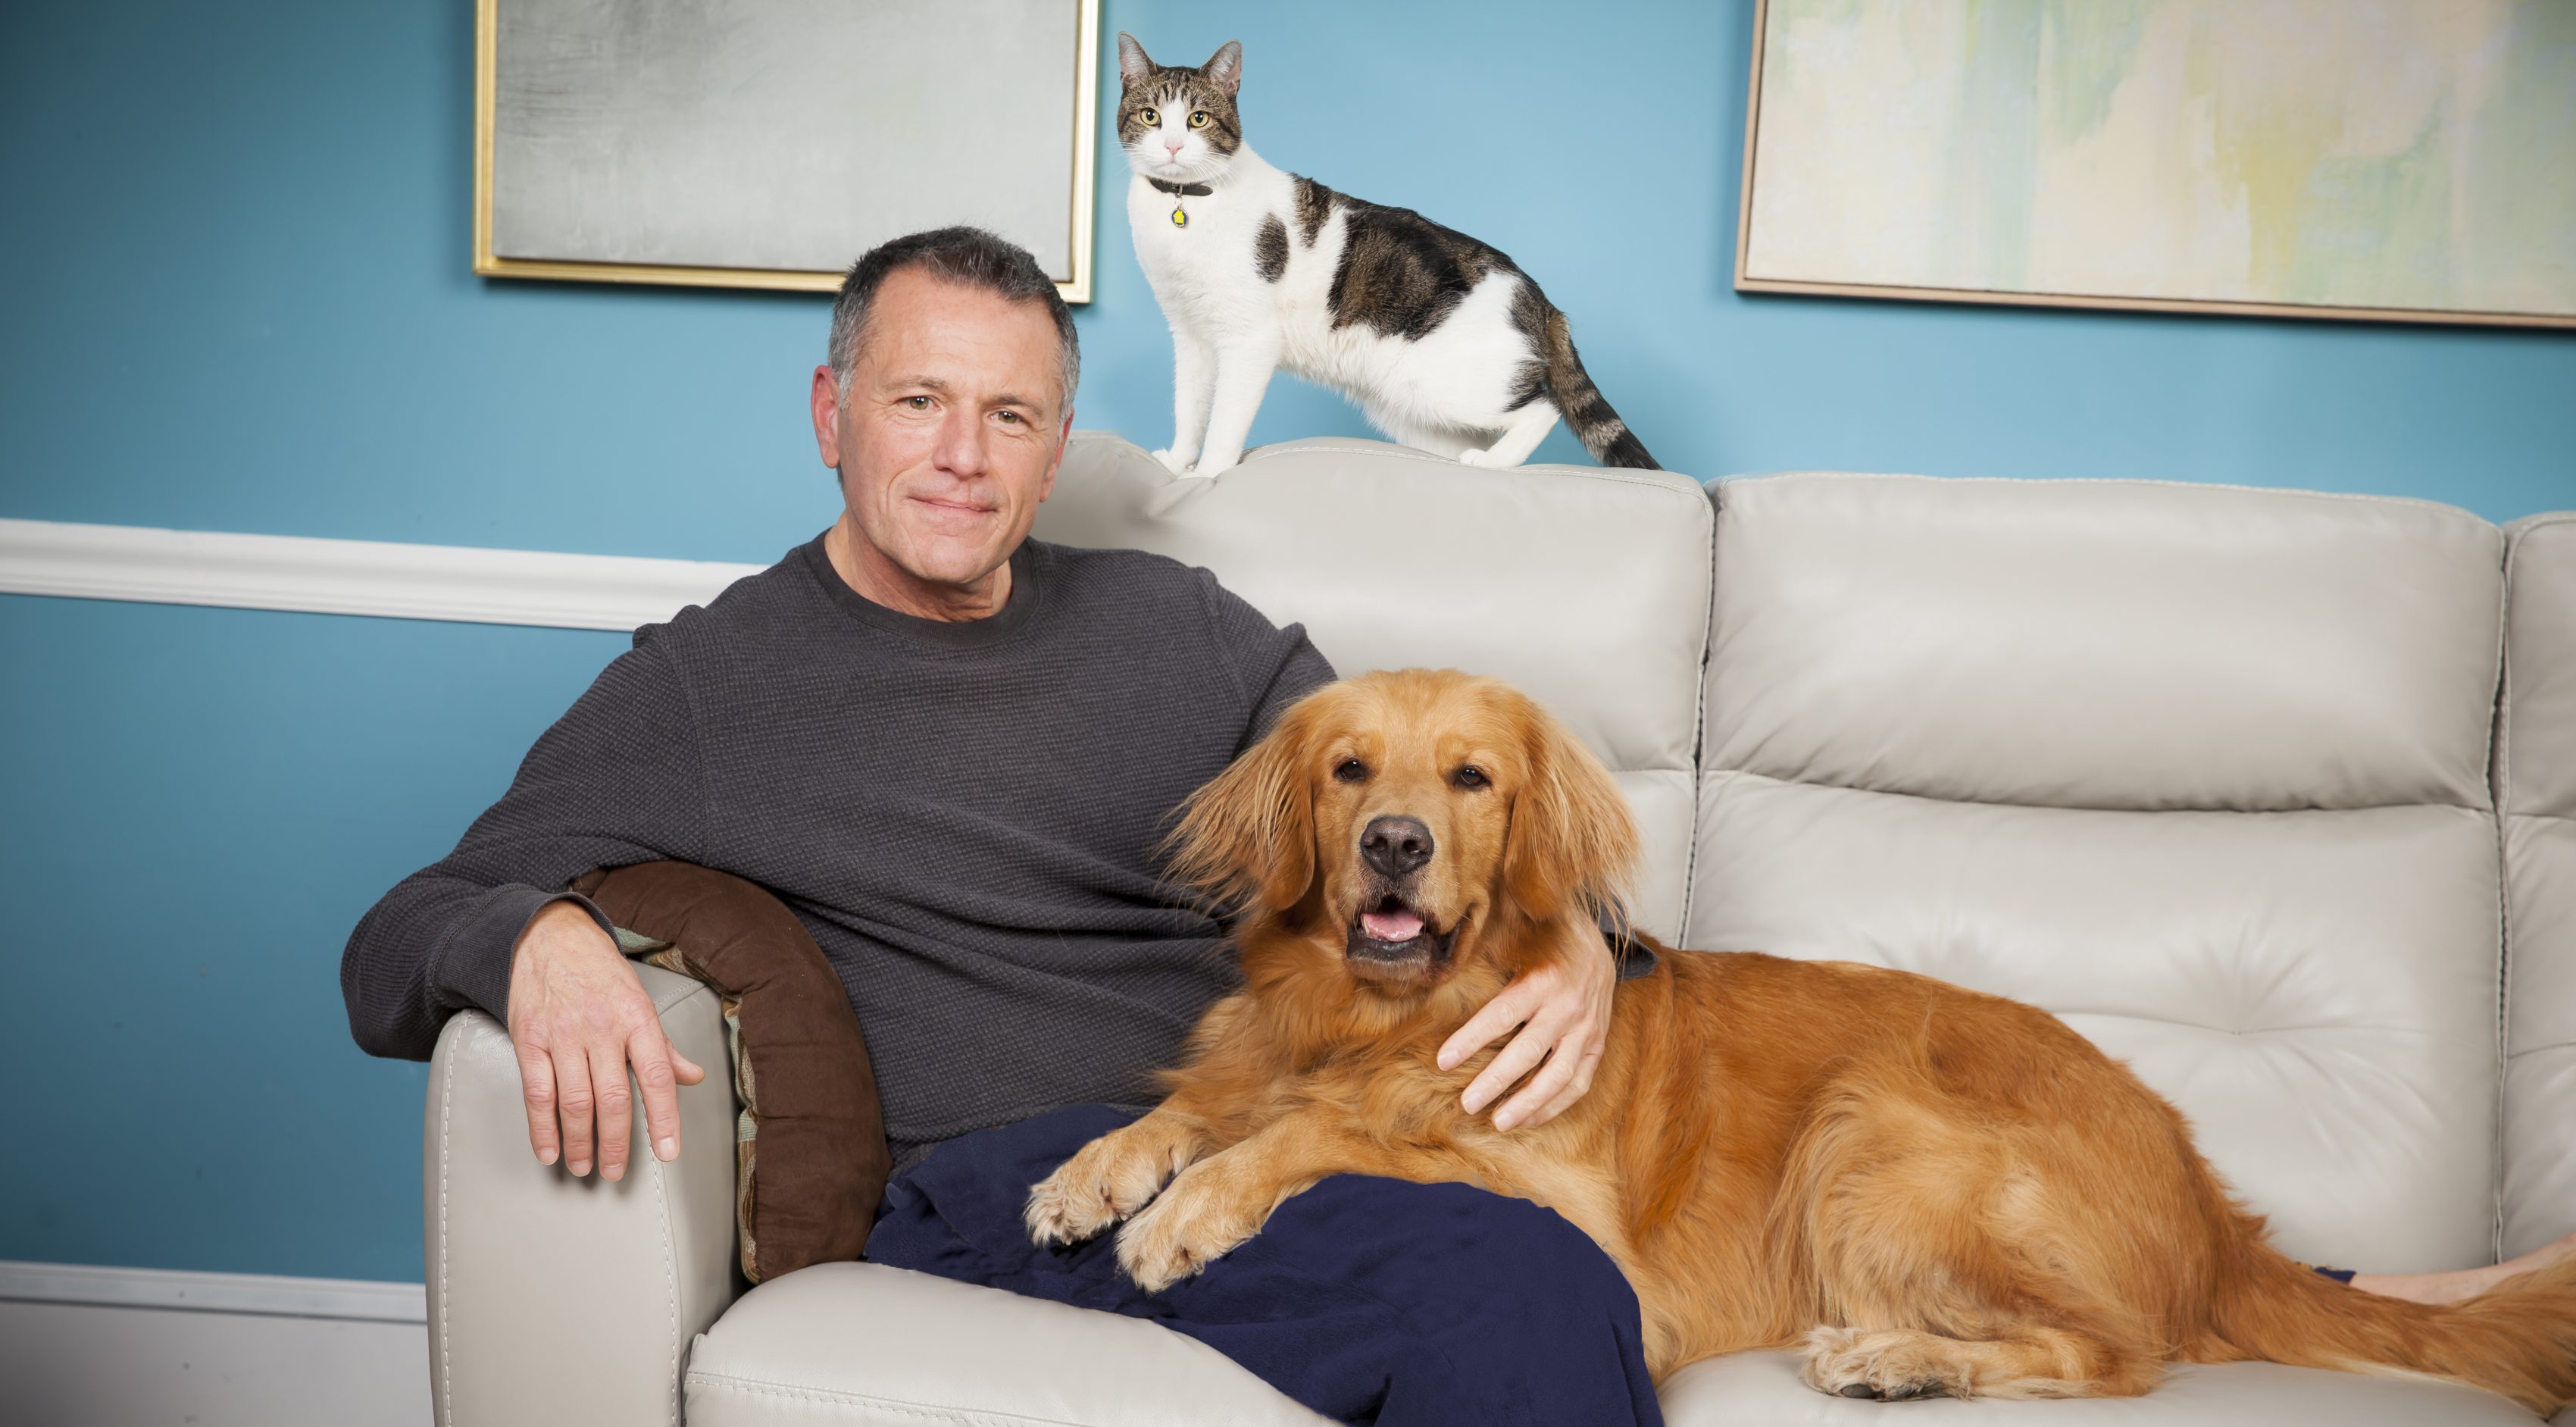 Male pet owner sitting on couch with his golden retriever and cat.